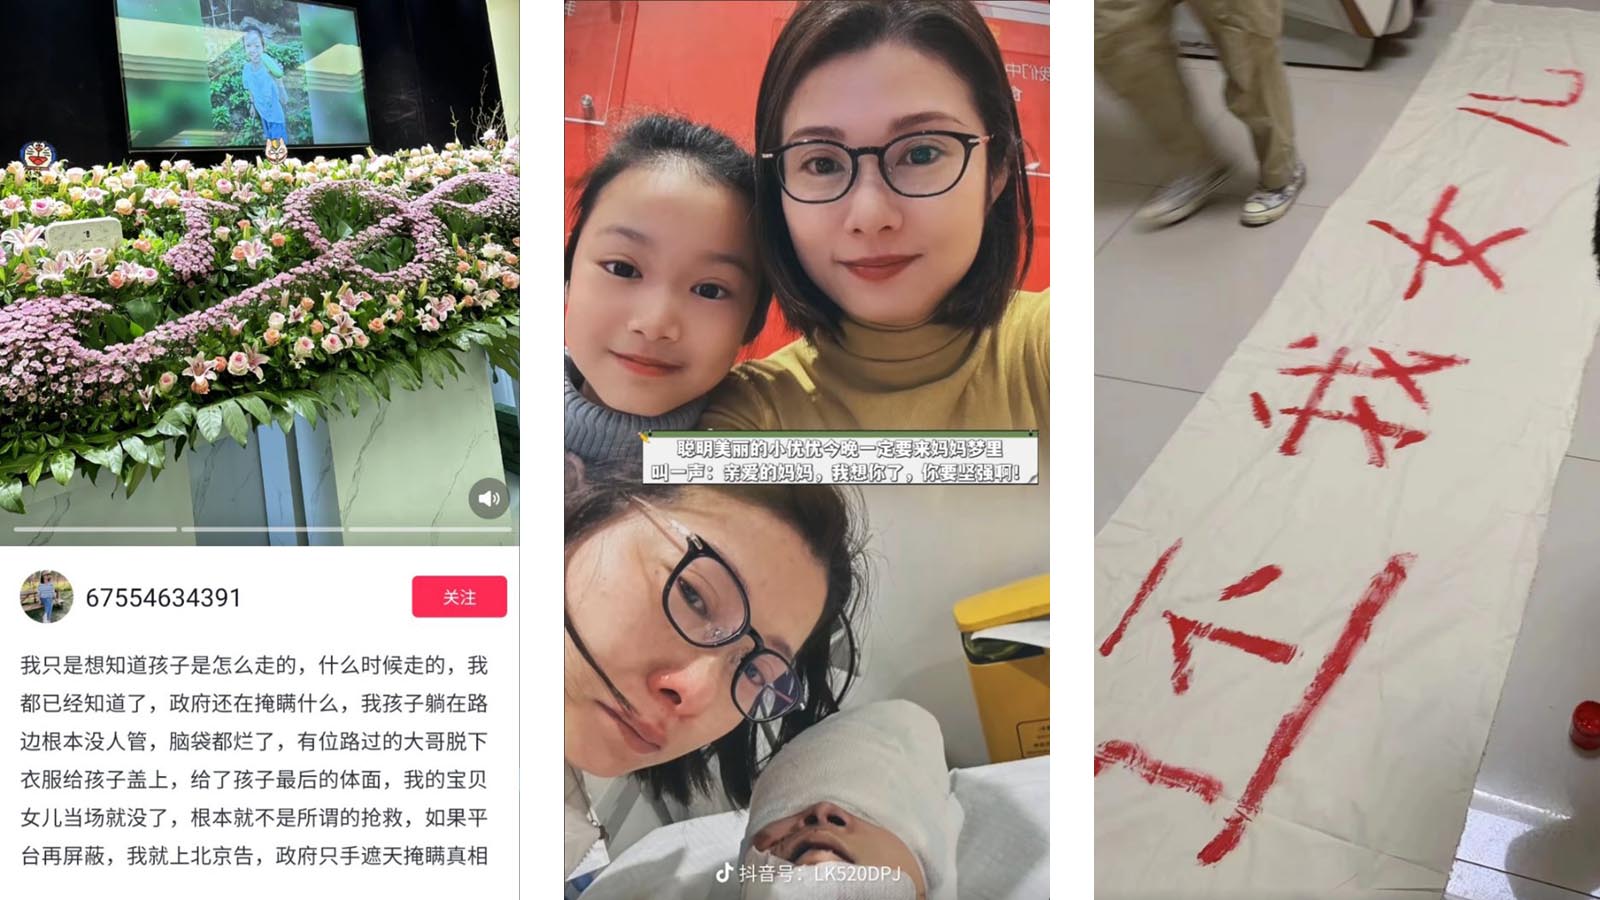 “Give me back my daughter!” Mom held a funeral for Gu Zixin on Mother’s Day and was inconsolable. The authorities sent police to maintain stability | Nantong traffic accident | Gu Zixin’s funeral | Traffic light failure | Waste truck hits bus